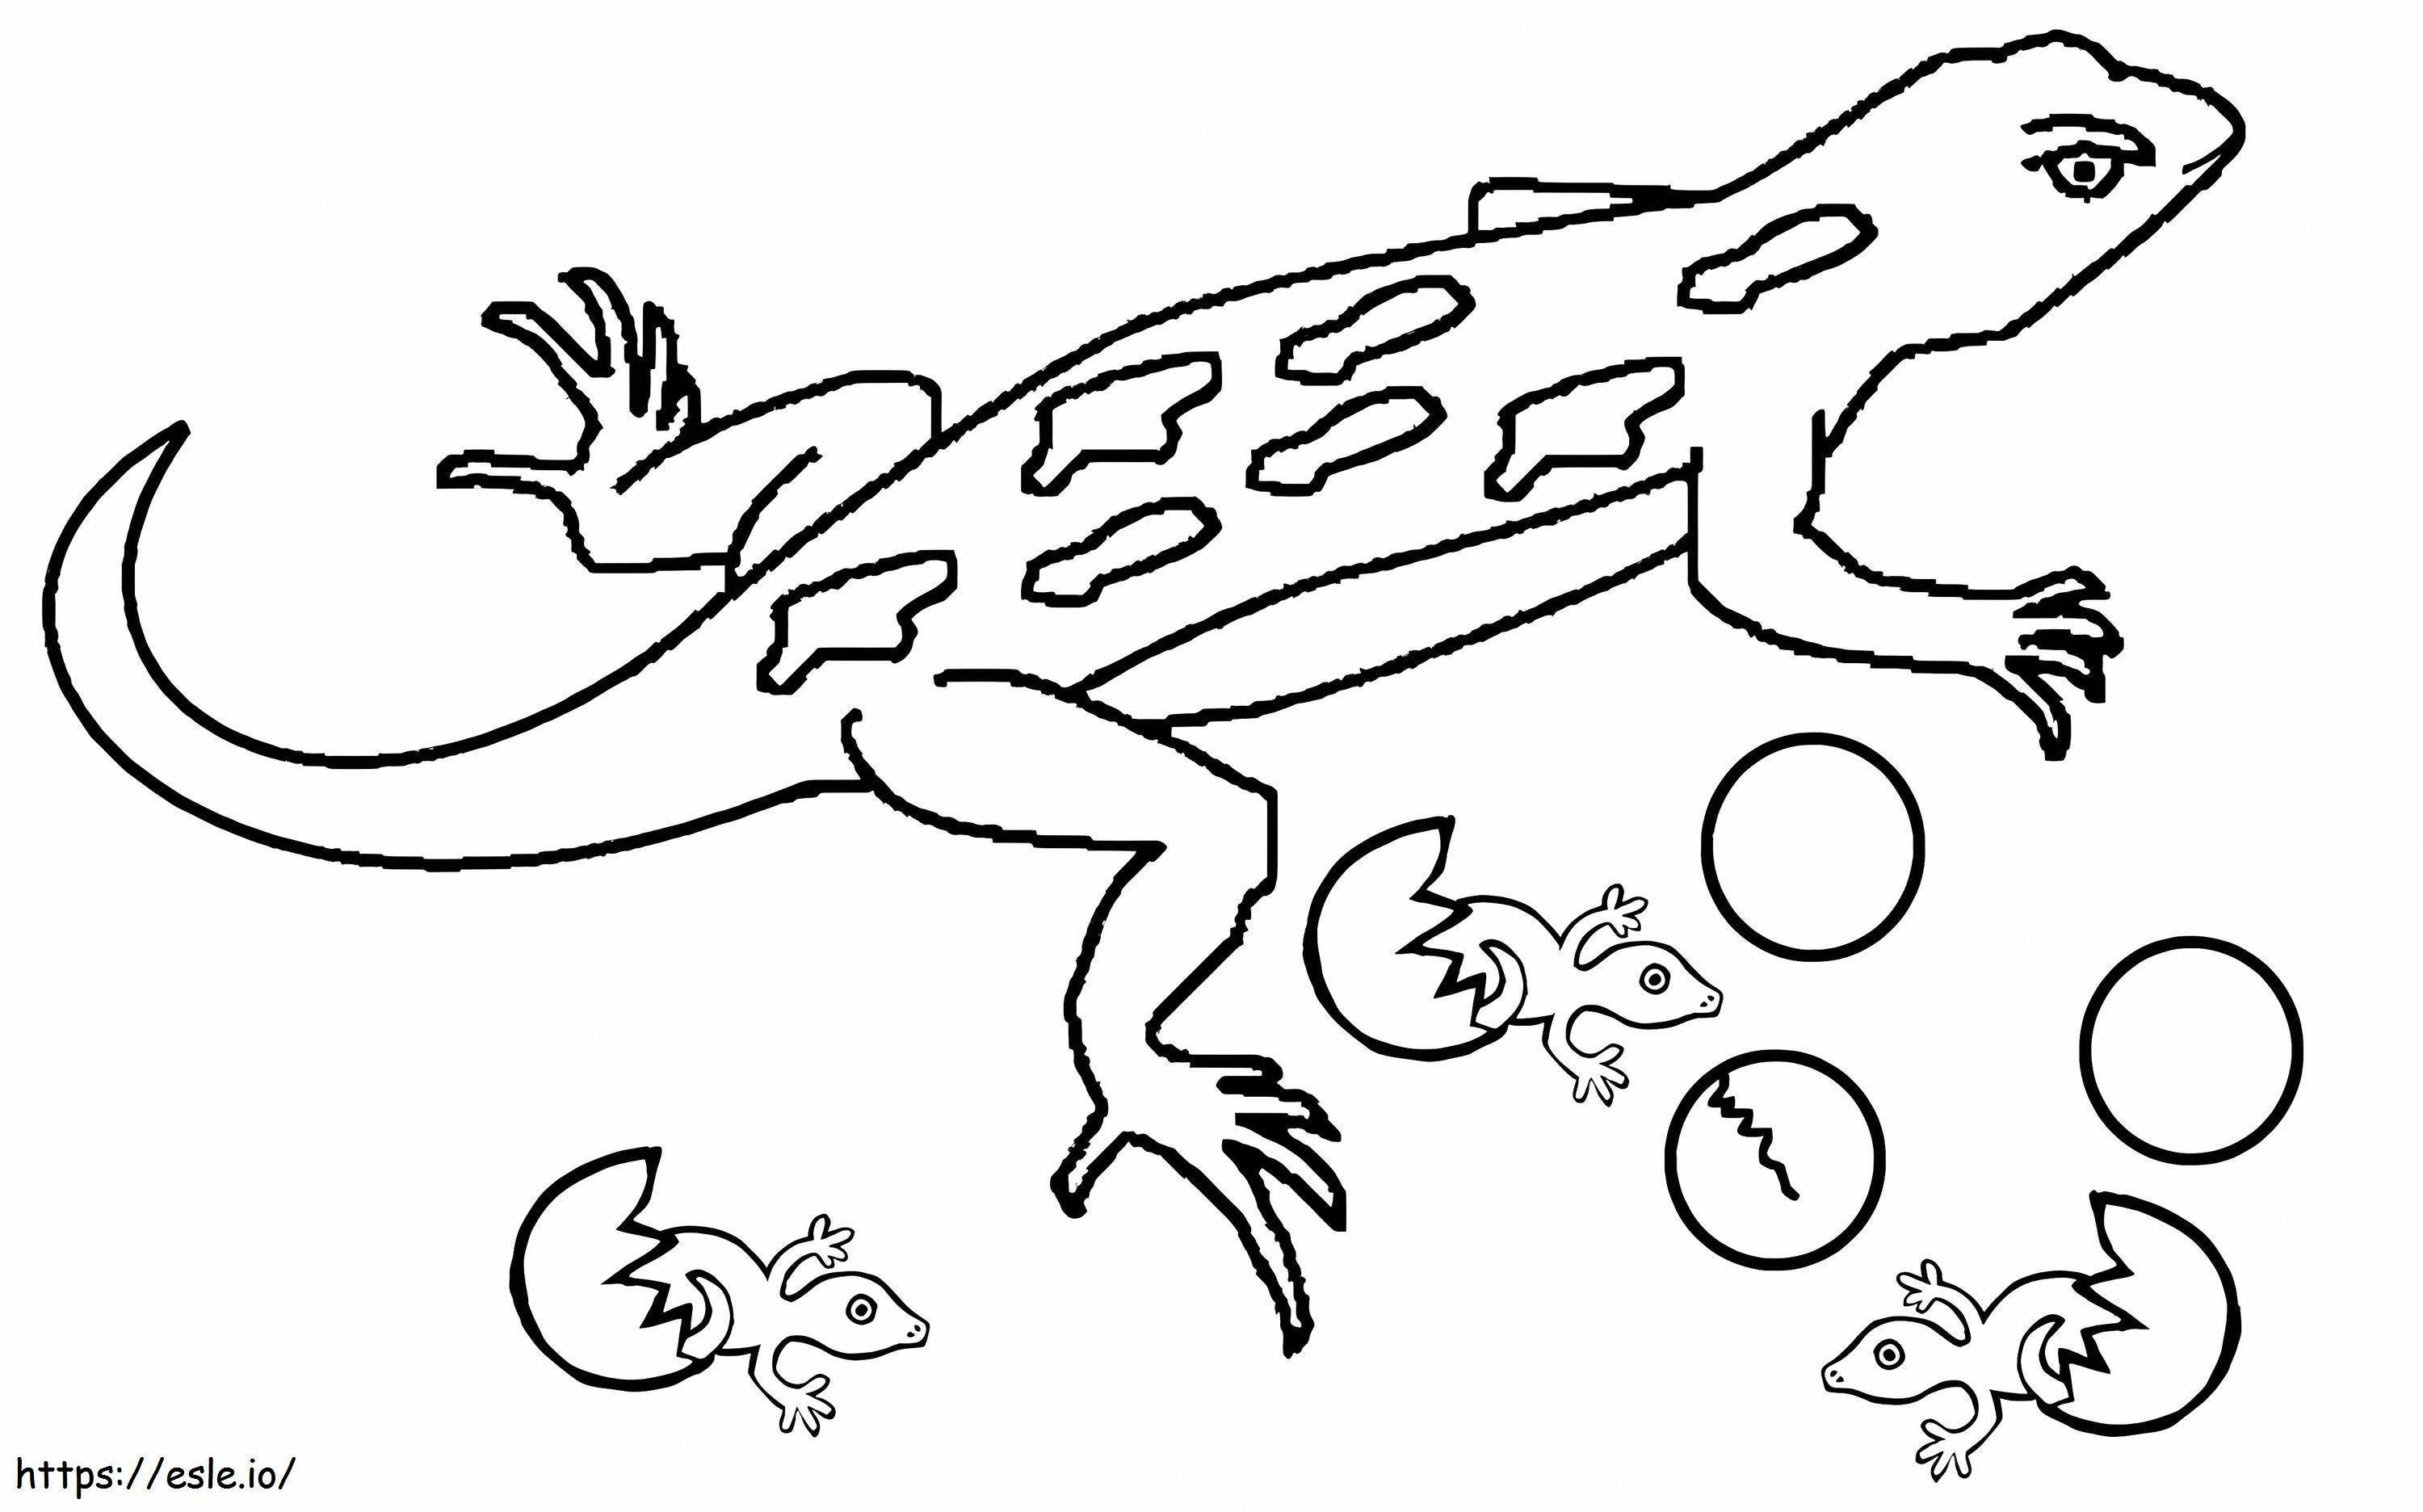 Geckos And Children coloring page